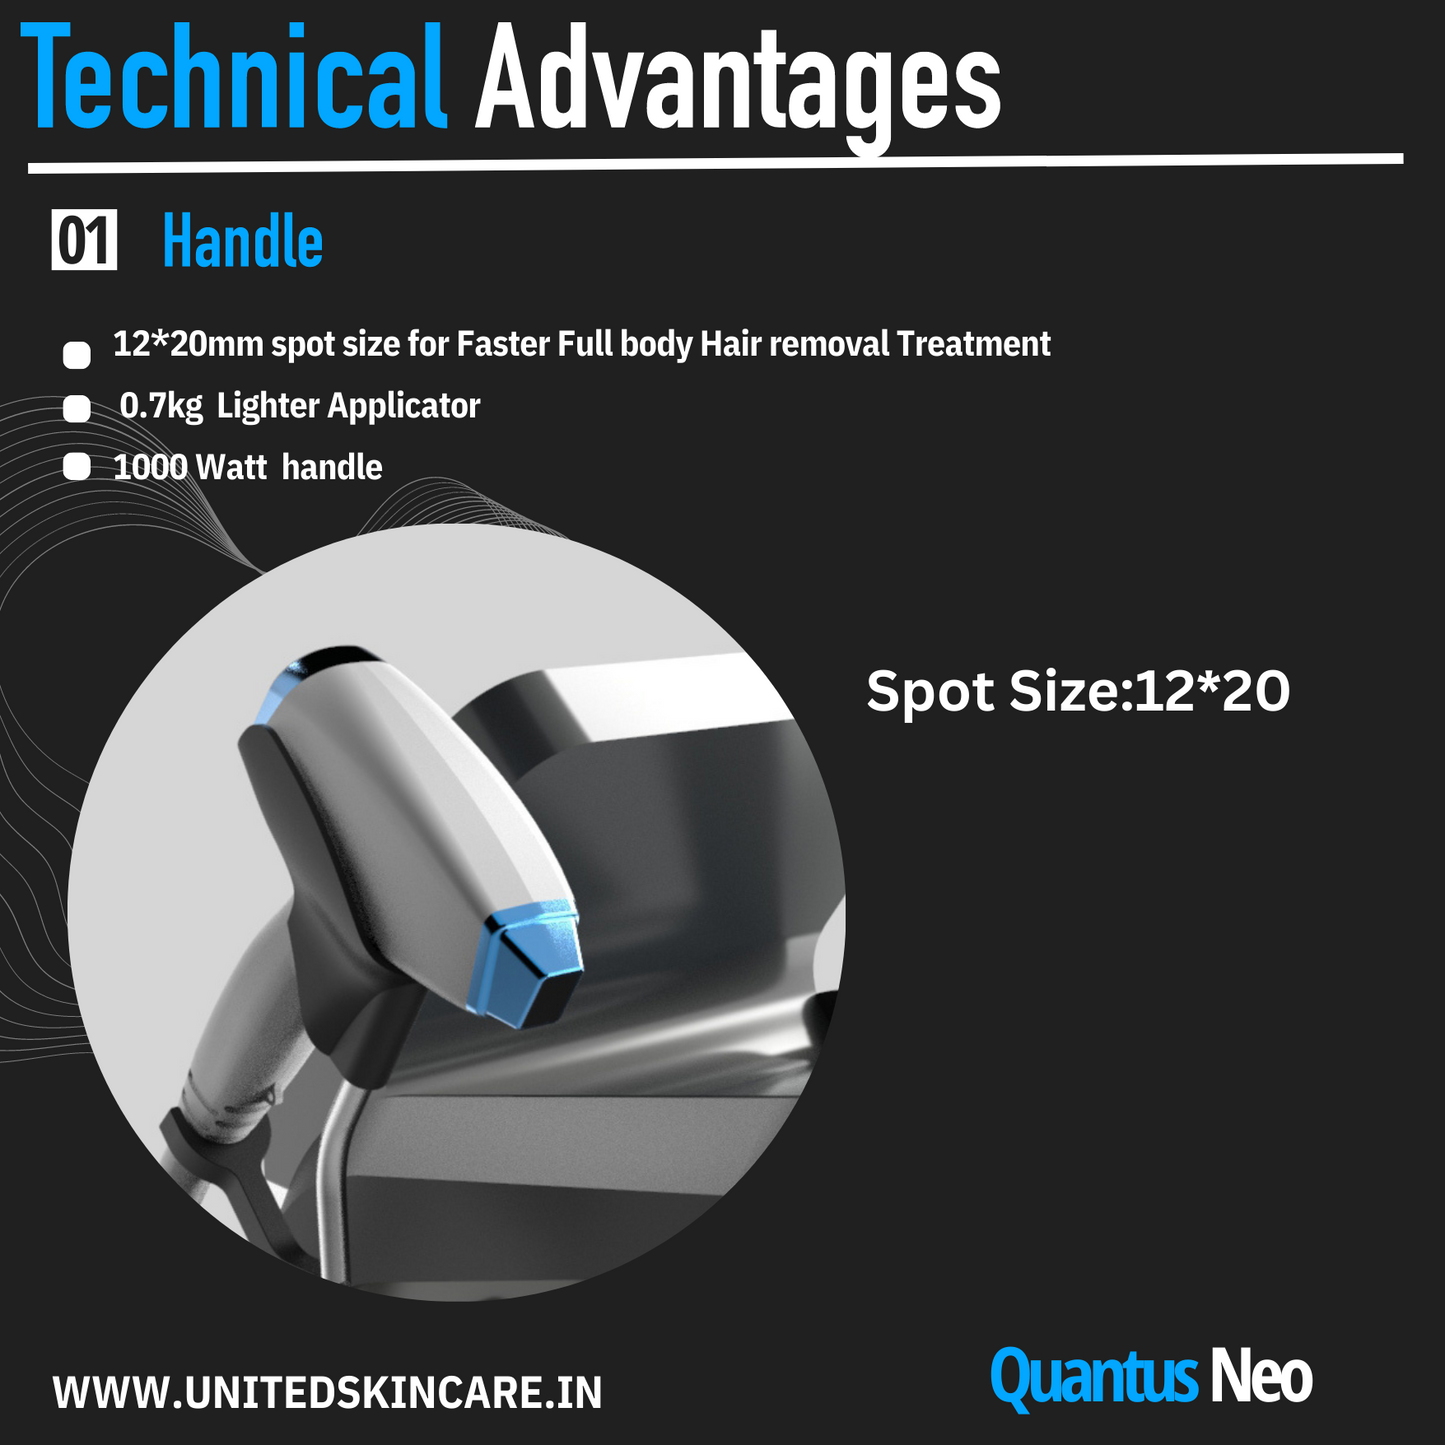 Quantus Neo Fda approved 1000w Triple wave Vertical Diode Laser With Hyper Cooling Technology . FDA/CE Approved Medical Laser 3 wavelength 755nm 808nm 1064nm Diode Laser Hair Removal Machines